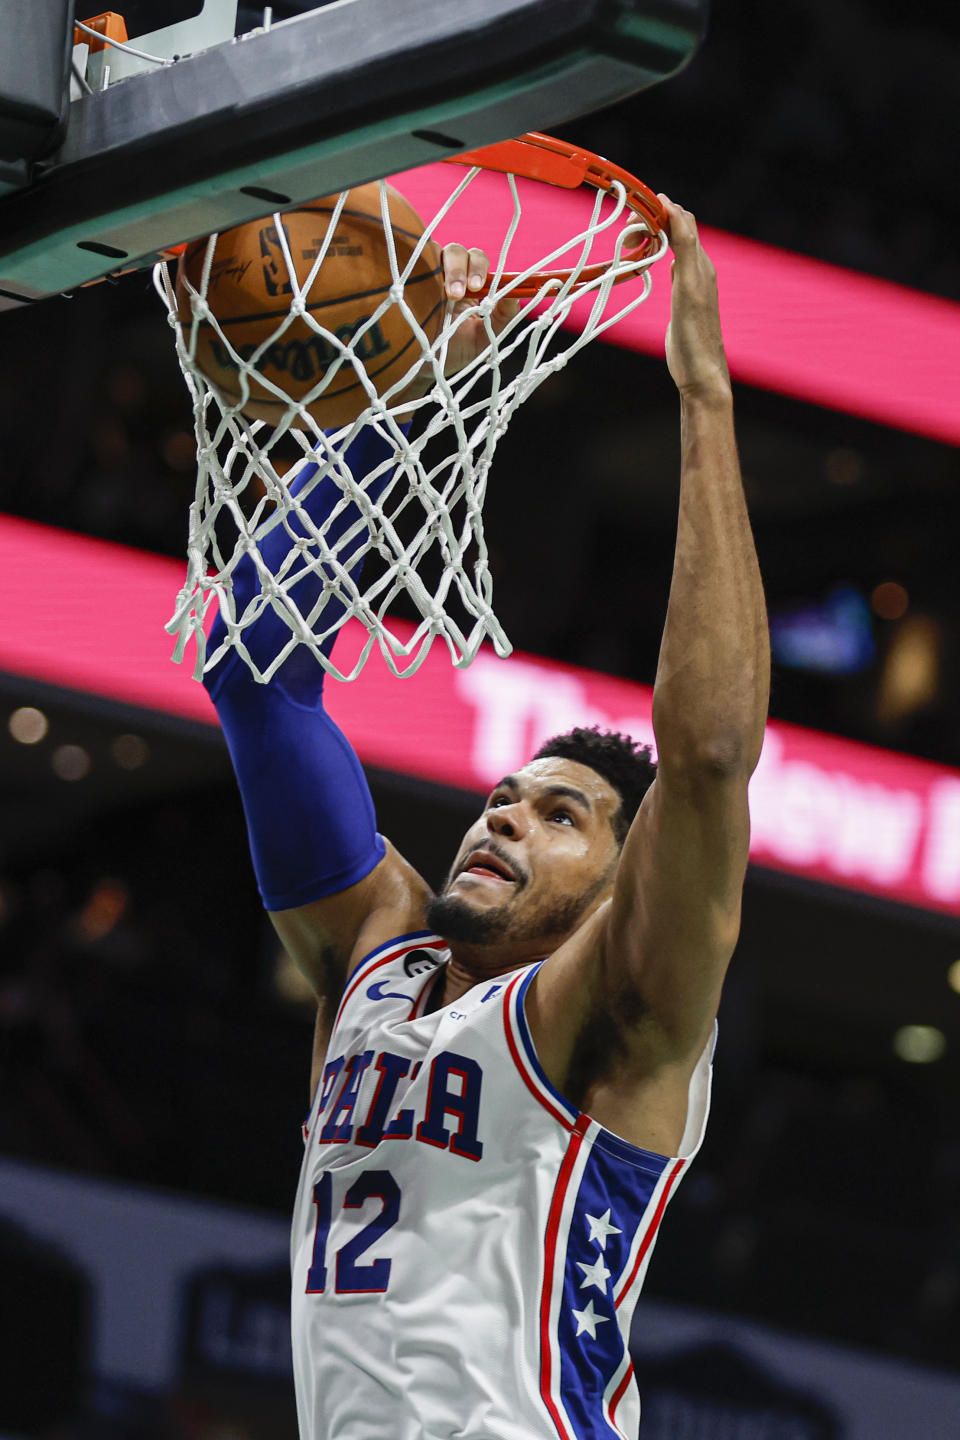 Philadelphia 76ers forward Tobias Harris dunks against the Charlotte Hornets during the second half of an NBA basketball game in Charlotte, N.C., Friday, March 17, 2023. (AP Photo/Nell Redmond)